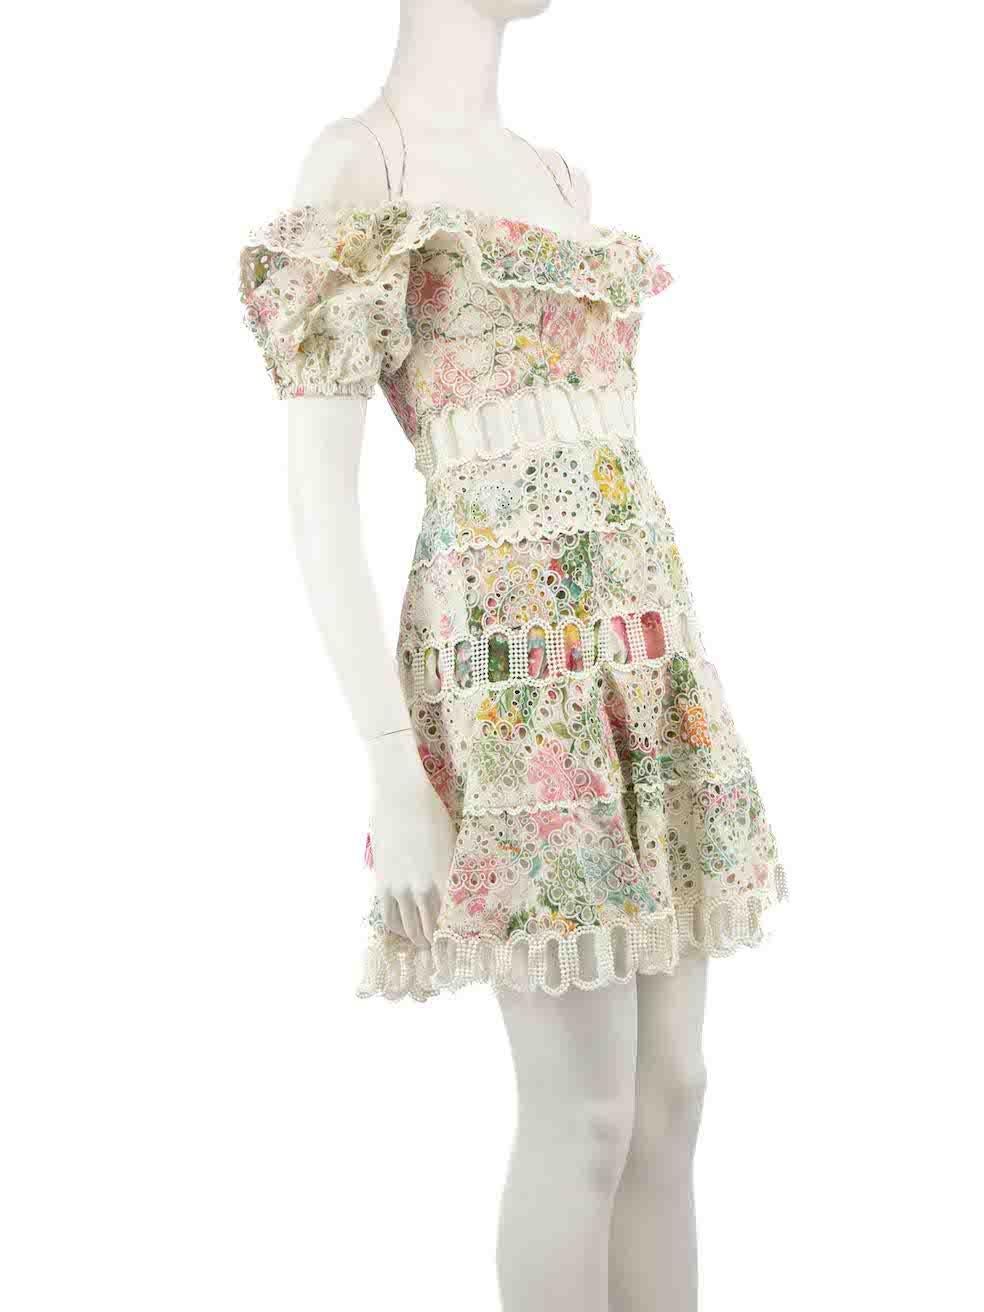 CONDITION is Very good. Hardly any visible wear to dress is evident on this used Zimmerman designer resale item.
 
 
 
 Details
 
 
 Multicolour- beige, green, yellow and pink
 
 Cotton
 
 Dress
 
 Floral pattern
 
 Short puff sleeves
 
 Off the